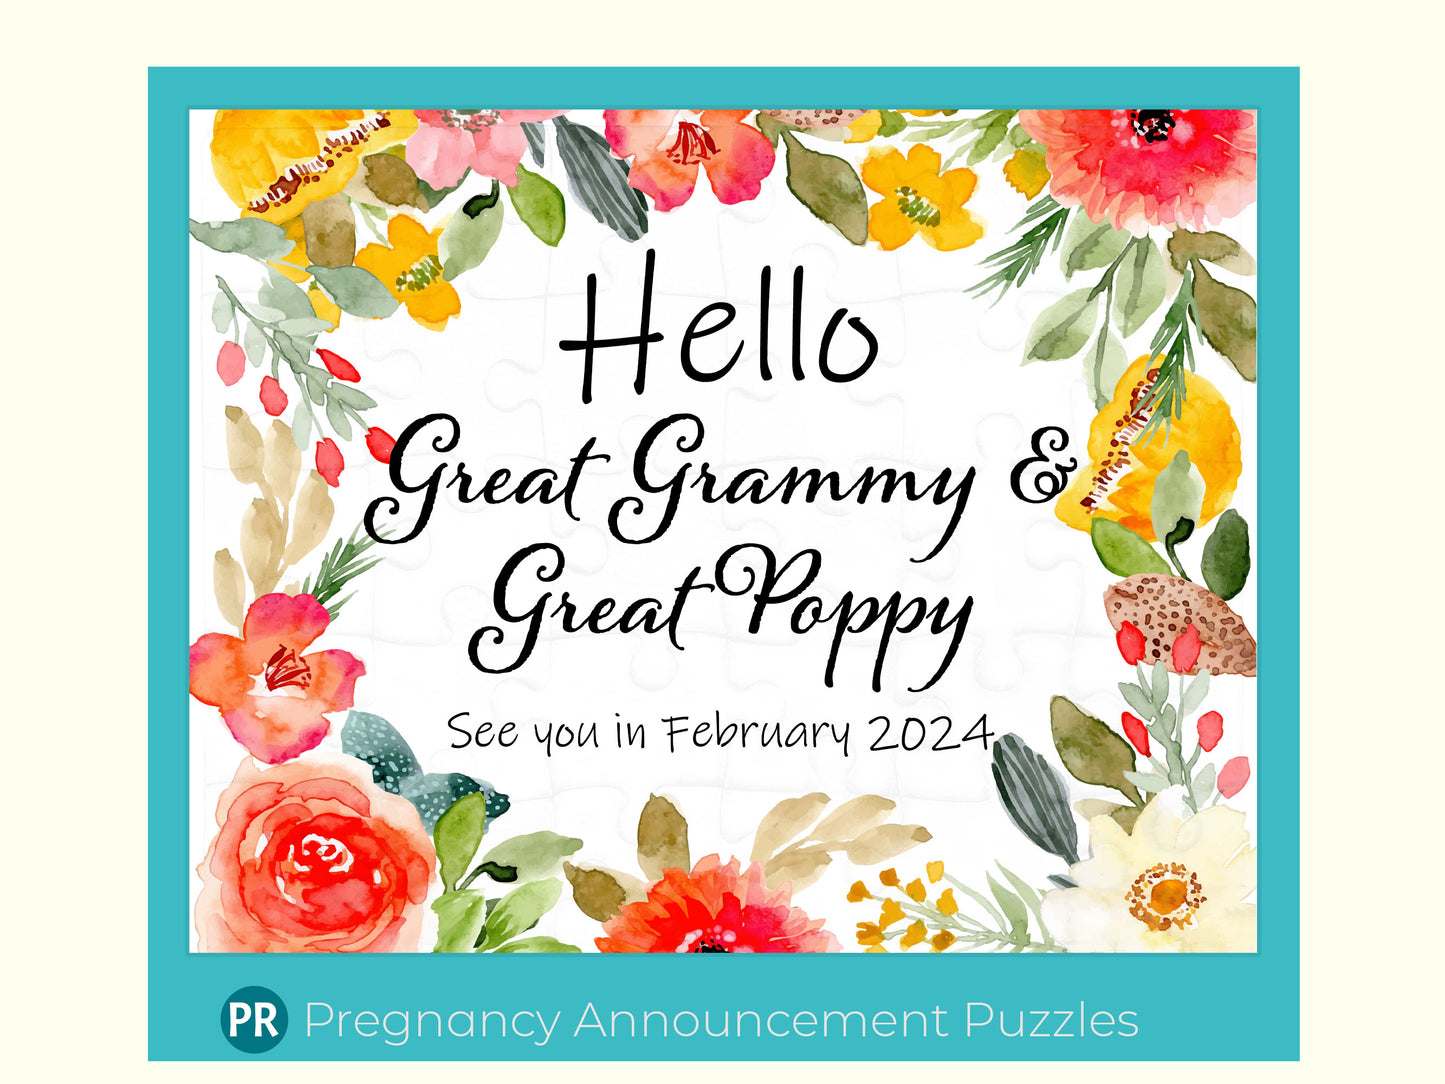 Baby is coming jigsaw puzzle announcement. Gift to give to grandparents or family members. Puzzle has a floral frame background and a custom message with to whom the puzzle is given and when expected to arrive.